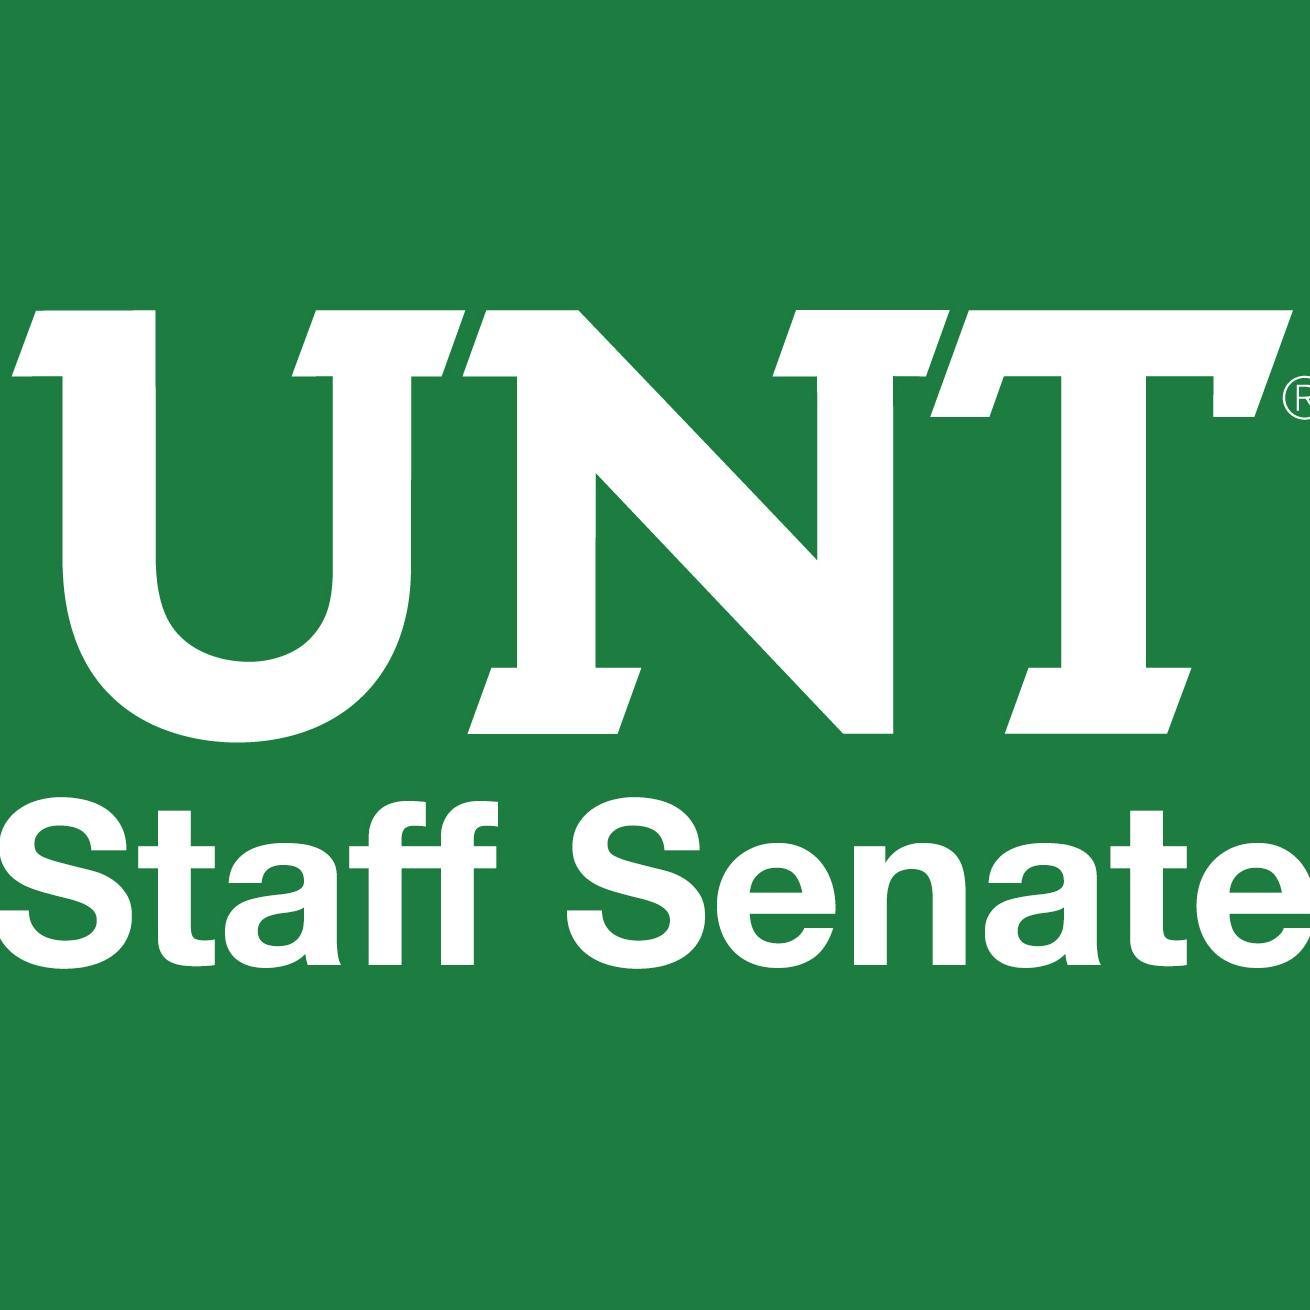 UNT Staff Senate comprises elected members who represent more than 2,300 staff employees. https://t.co/QUYP54MDYH